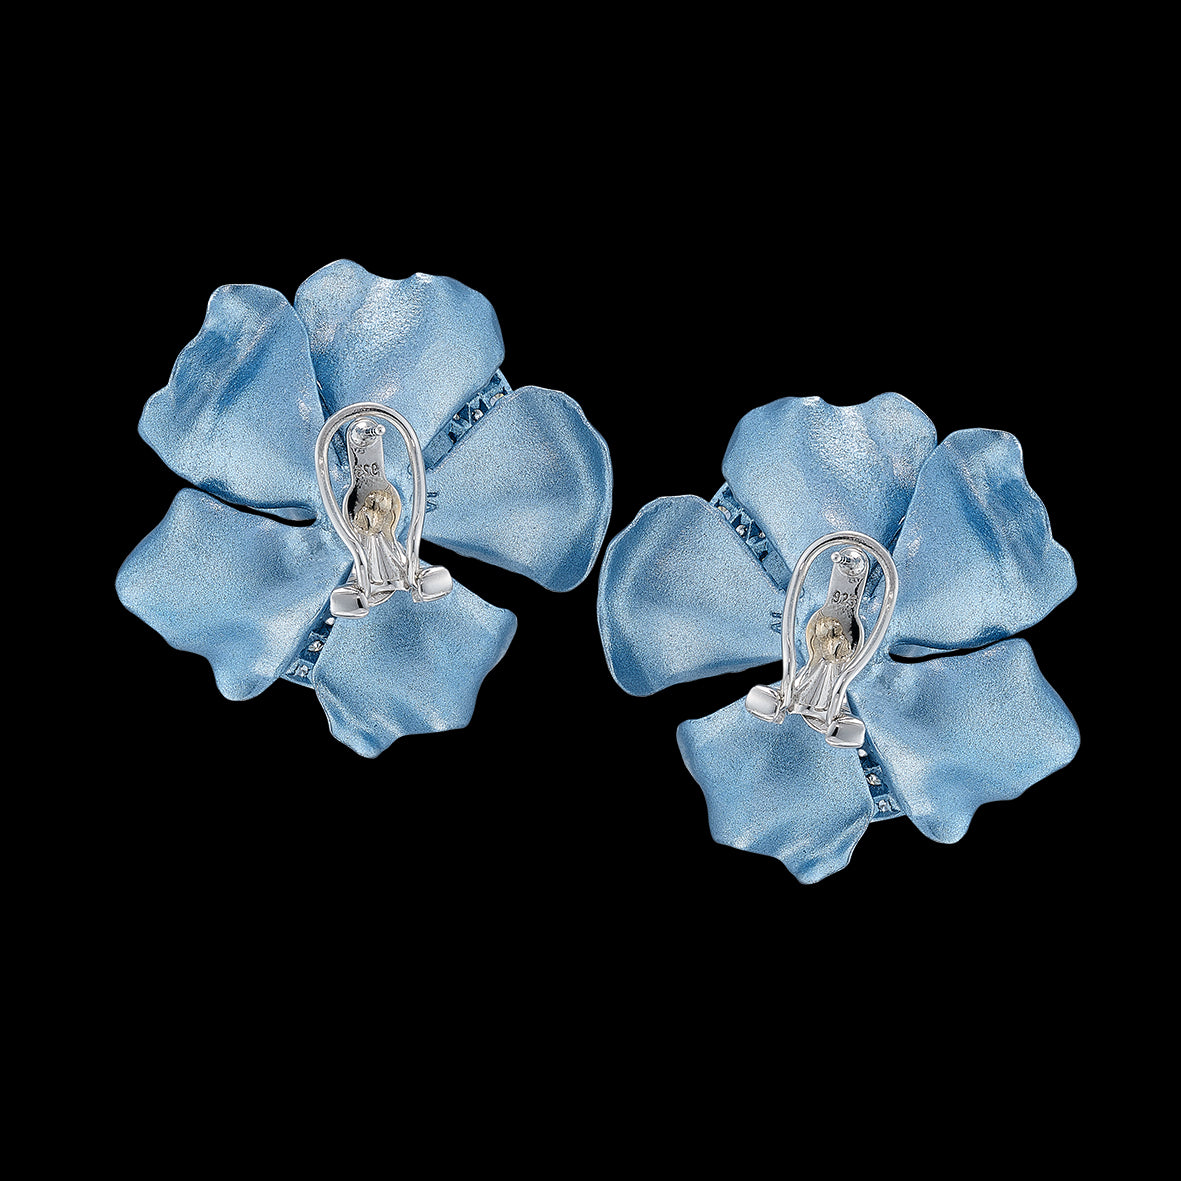 Baby Blue Camelia Earrings , Earrings, Anabela Chan Joaillerie - Fine jewelry with laboratory grown and created gemstones hand-crafted in the United Kingdom. Anabela Chan Joaillerie is the first fine jewellery brand in the world to champion laboratory-grown and created gemstones with high jewellery design, artisanal craftsmanship and a focus on ethical and sustainable innovations.